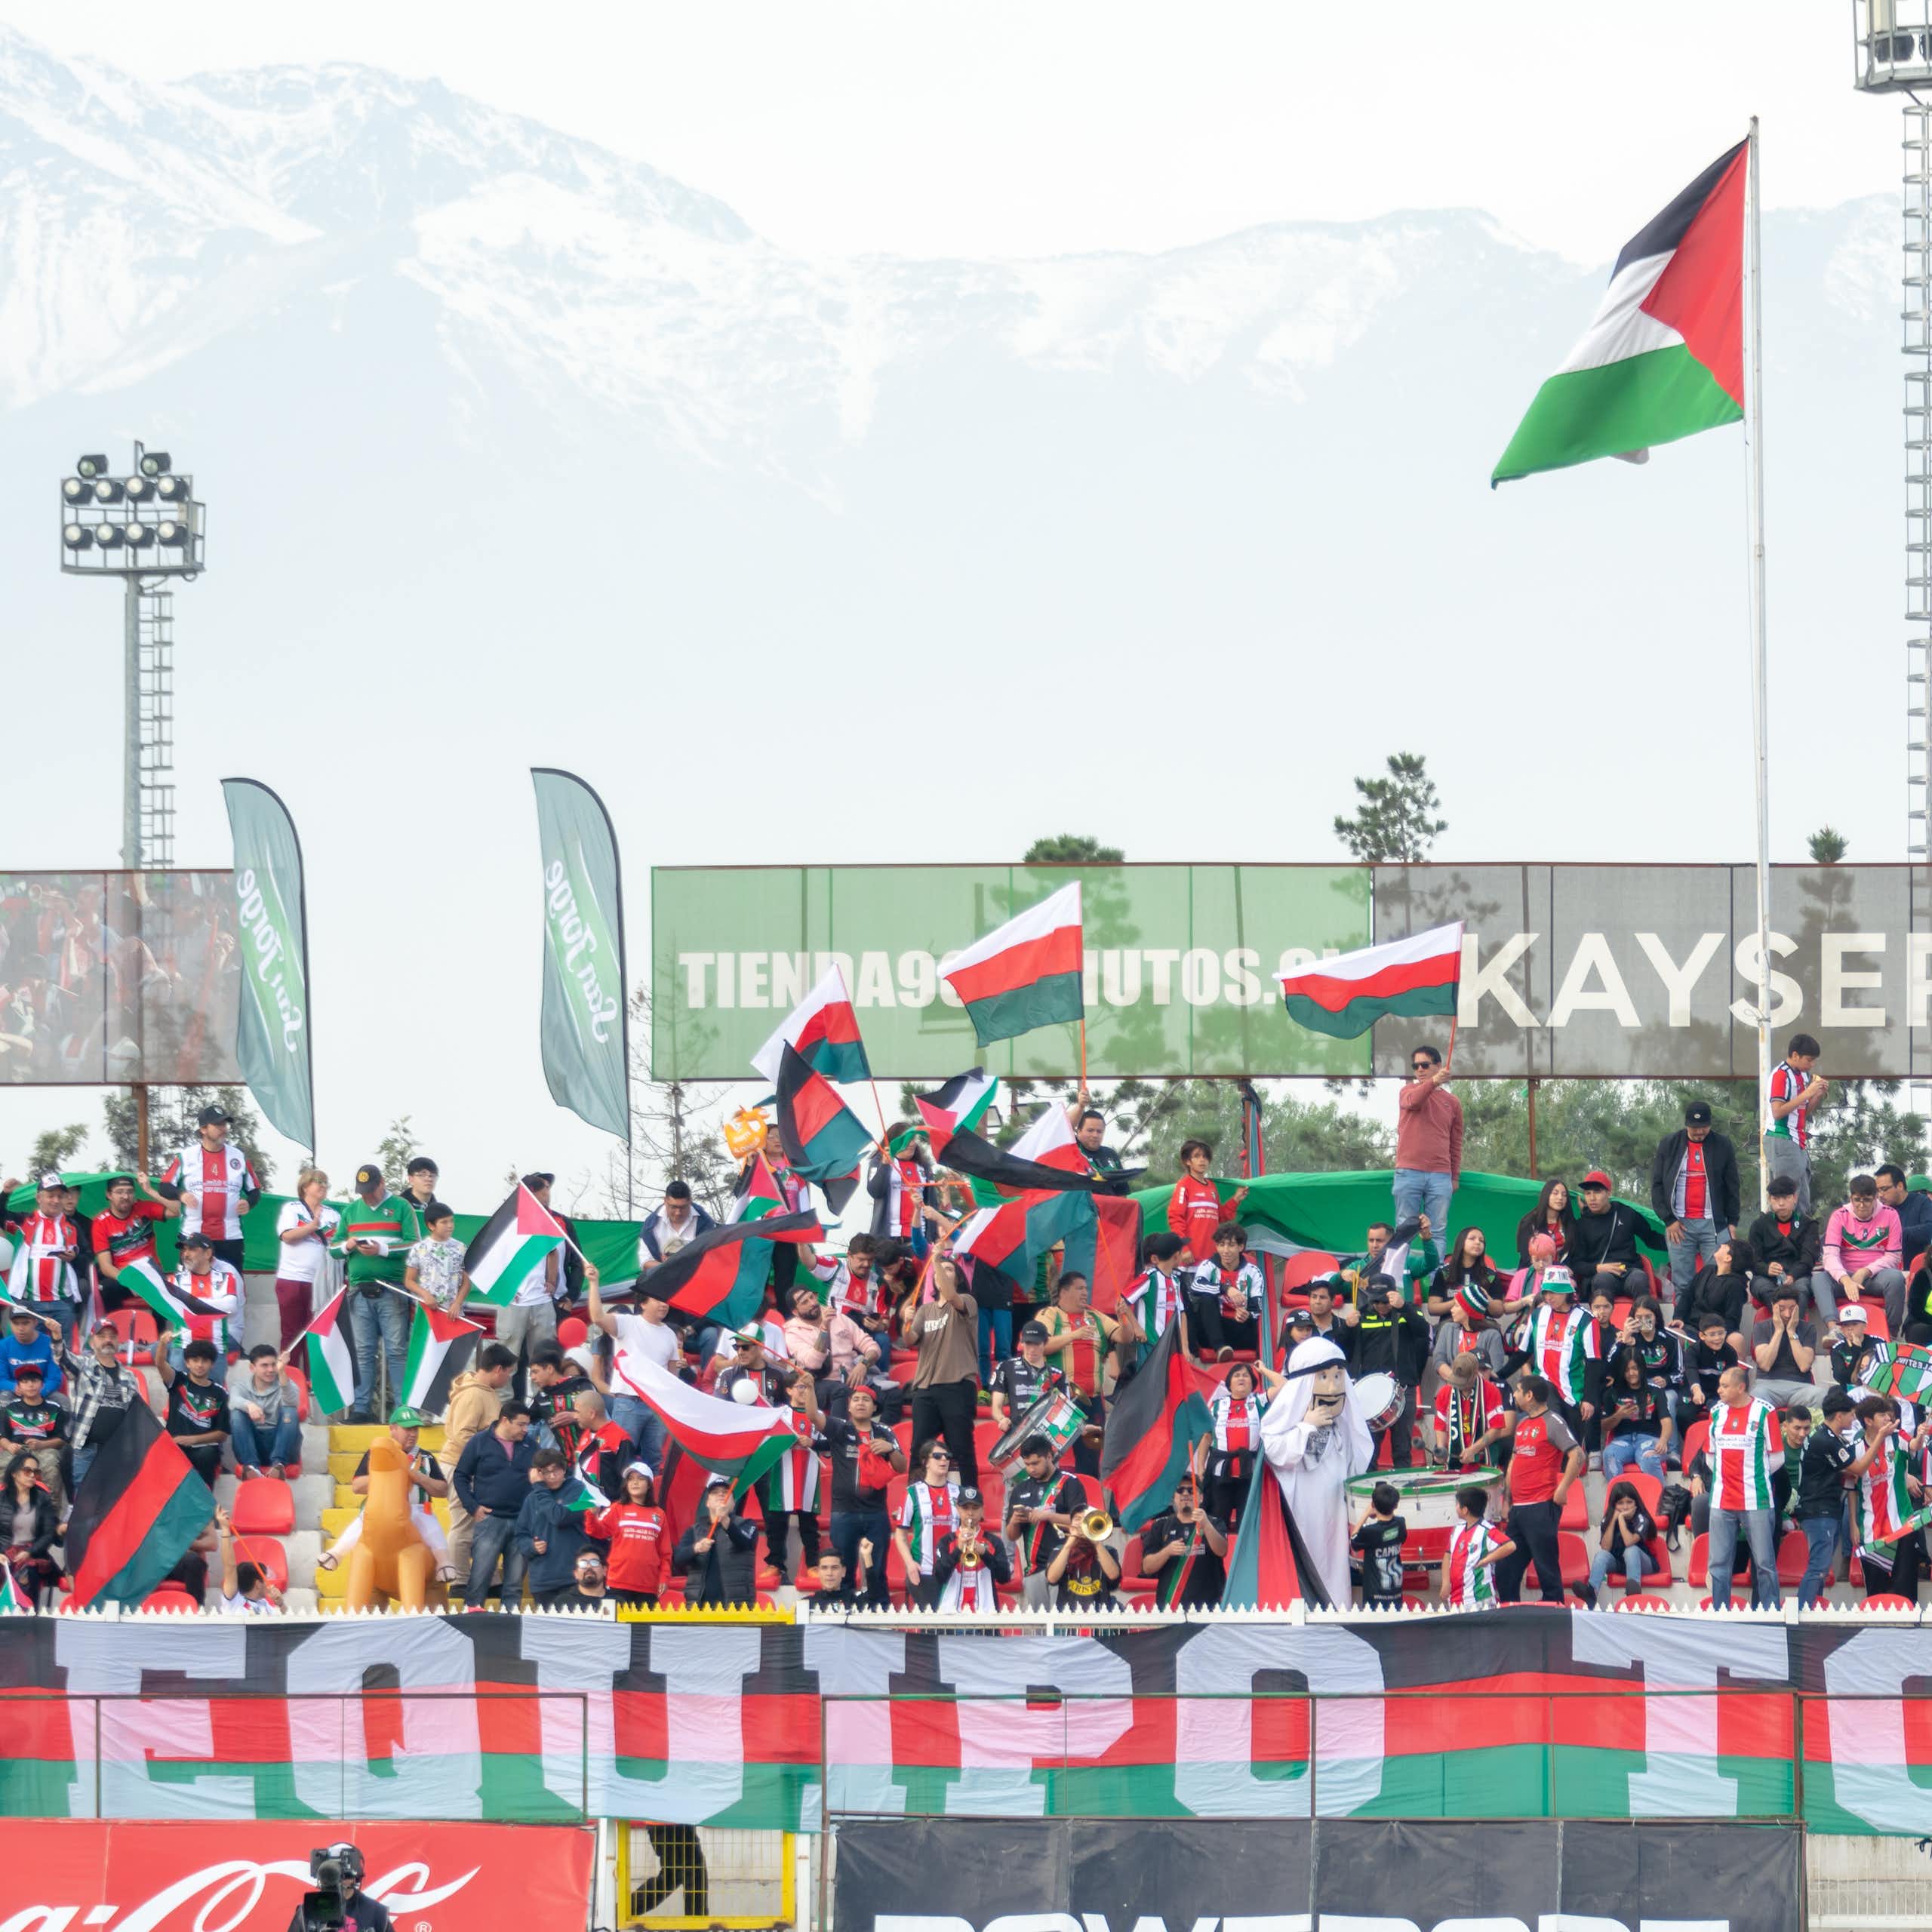 A stand filled with fans wearing red, white and green t-shirts and waving Palestinian flags.